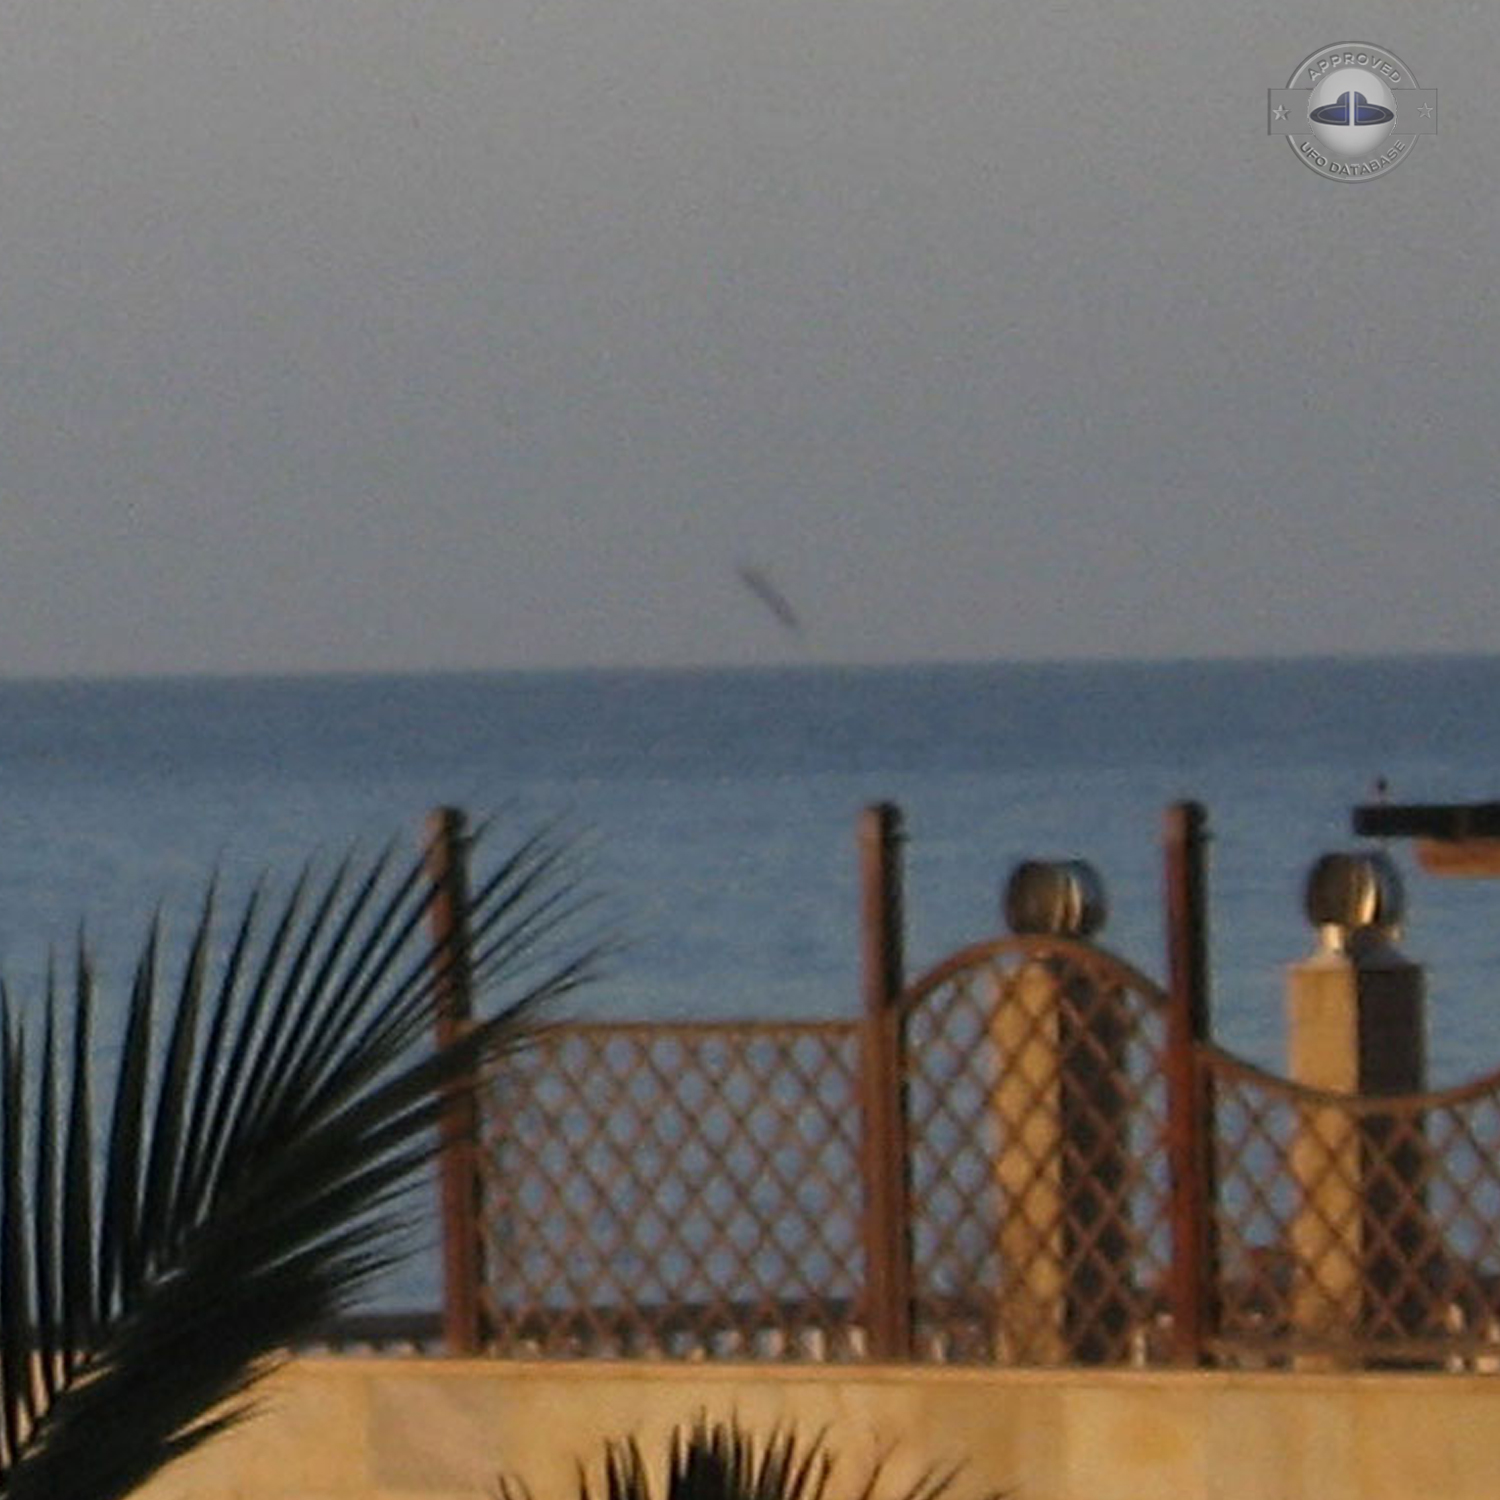 Proof of UFO diving under the Sea Canary island Fuerteventura | 2011 UFO Picture #235-2